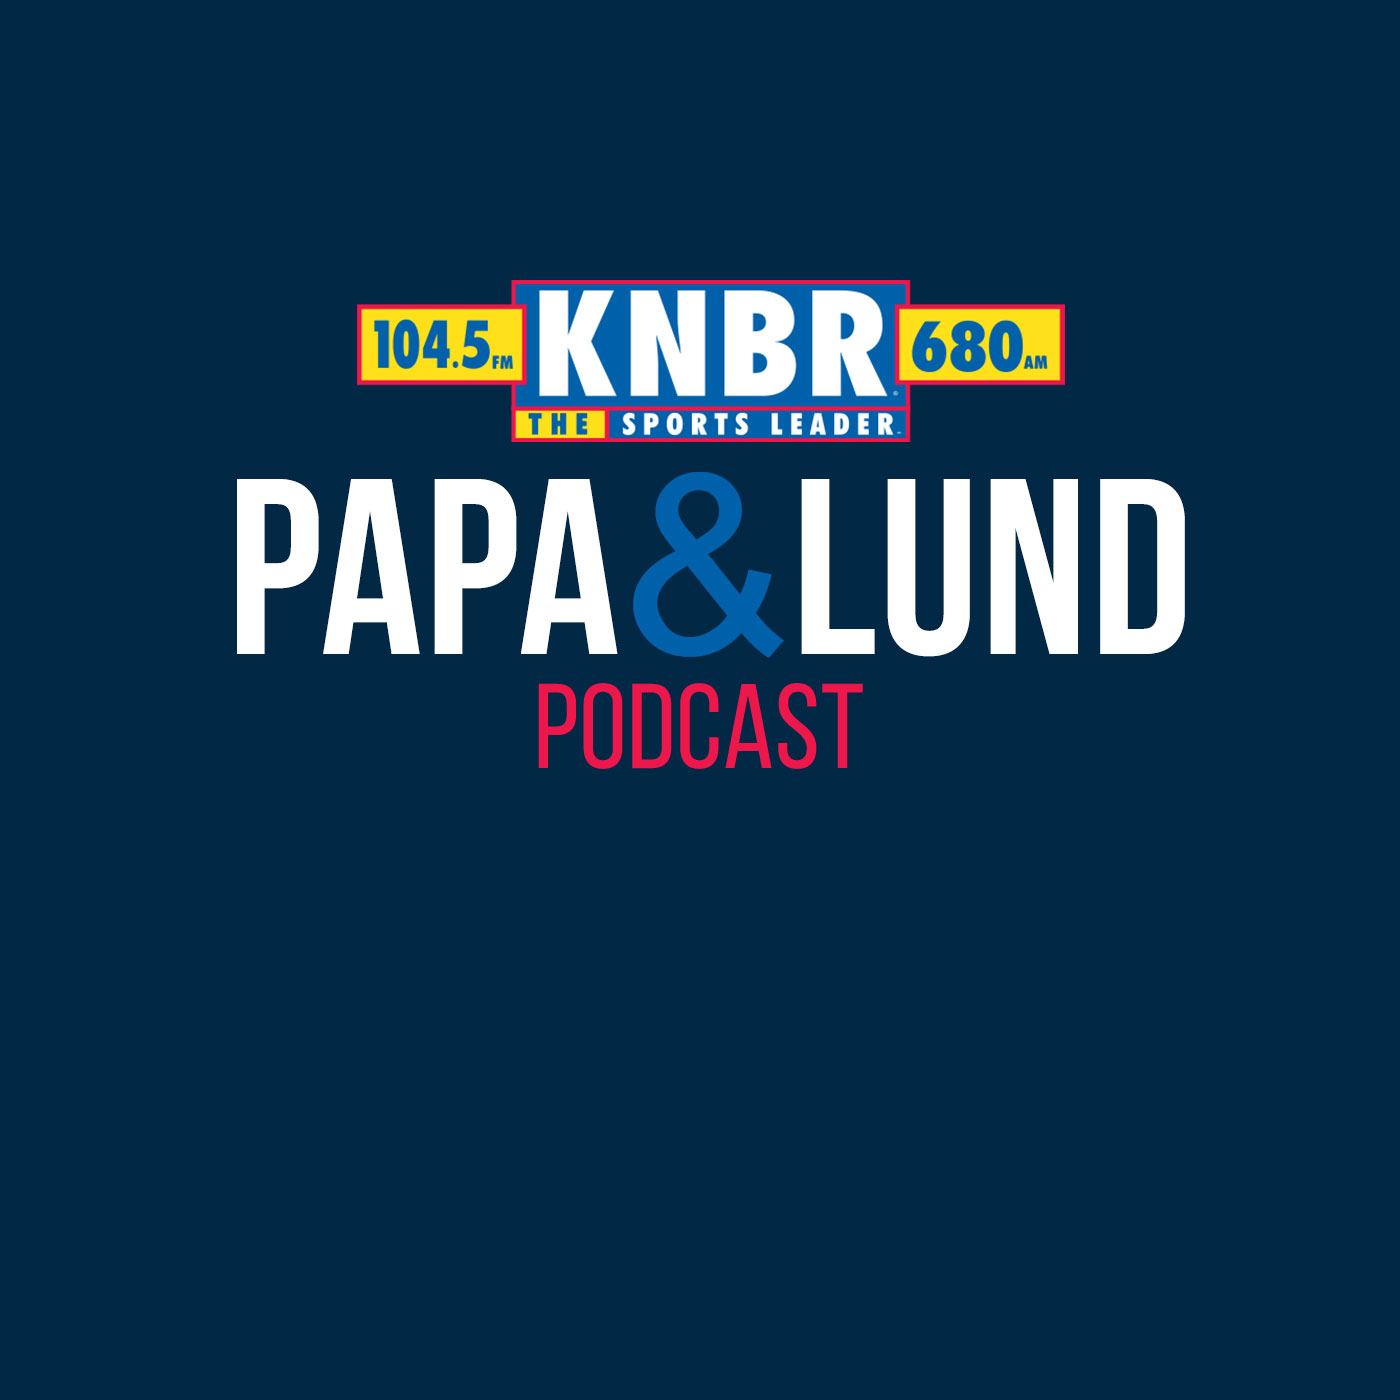 4-18 Zach Harper joins Papa & Lund to take a look at the Western Conference playoffs as well as what may come from Draymond's stomp on Sabonis